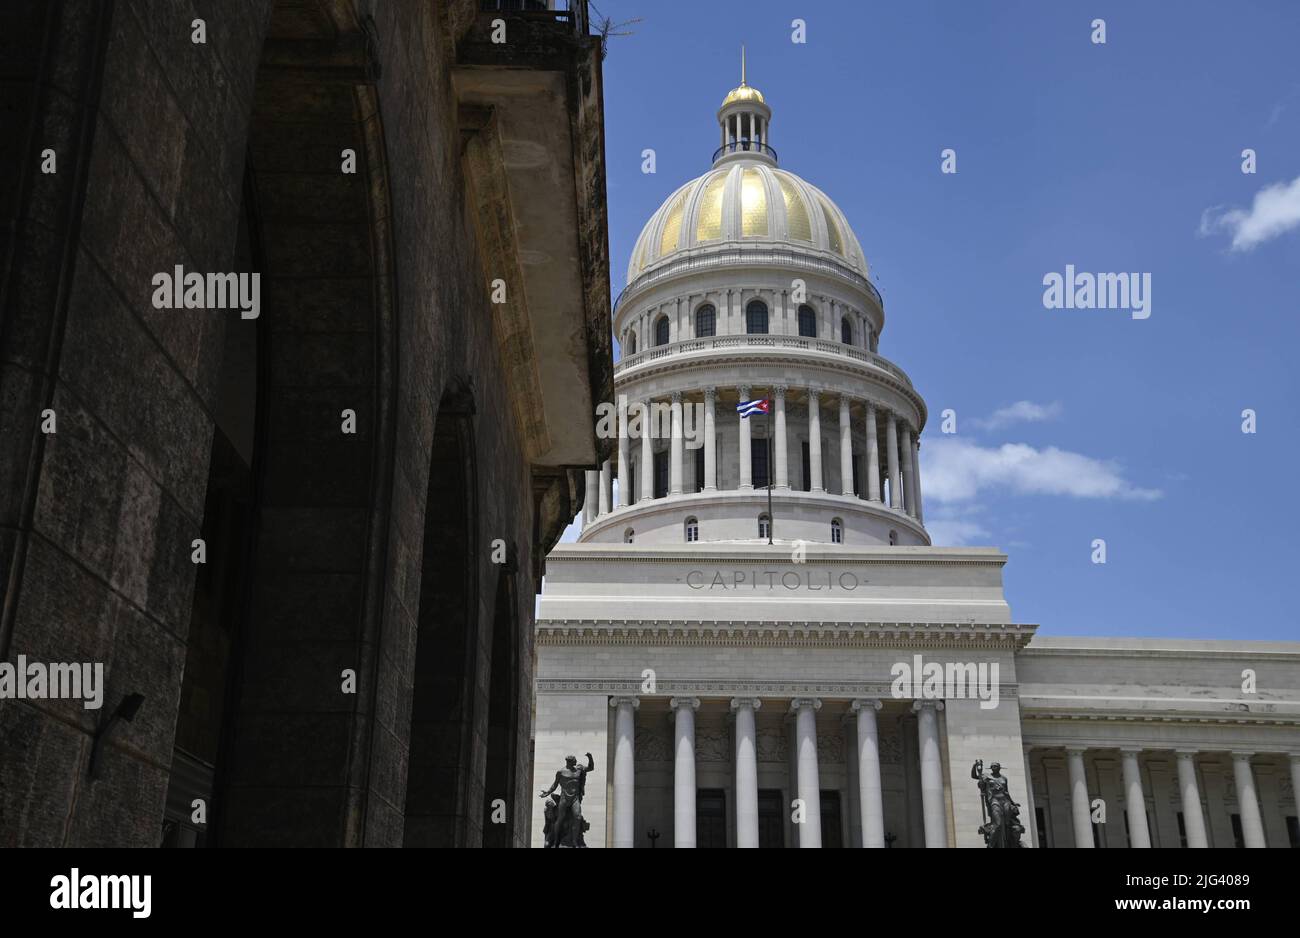 Landscape with panoramic cupola view of El Capitolio, the emblematic National Capitol building in the historic center of Havana, Cuba. Stock Photo